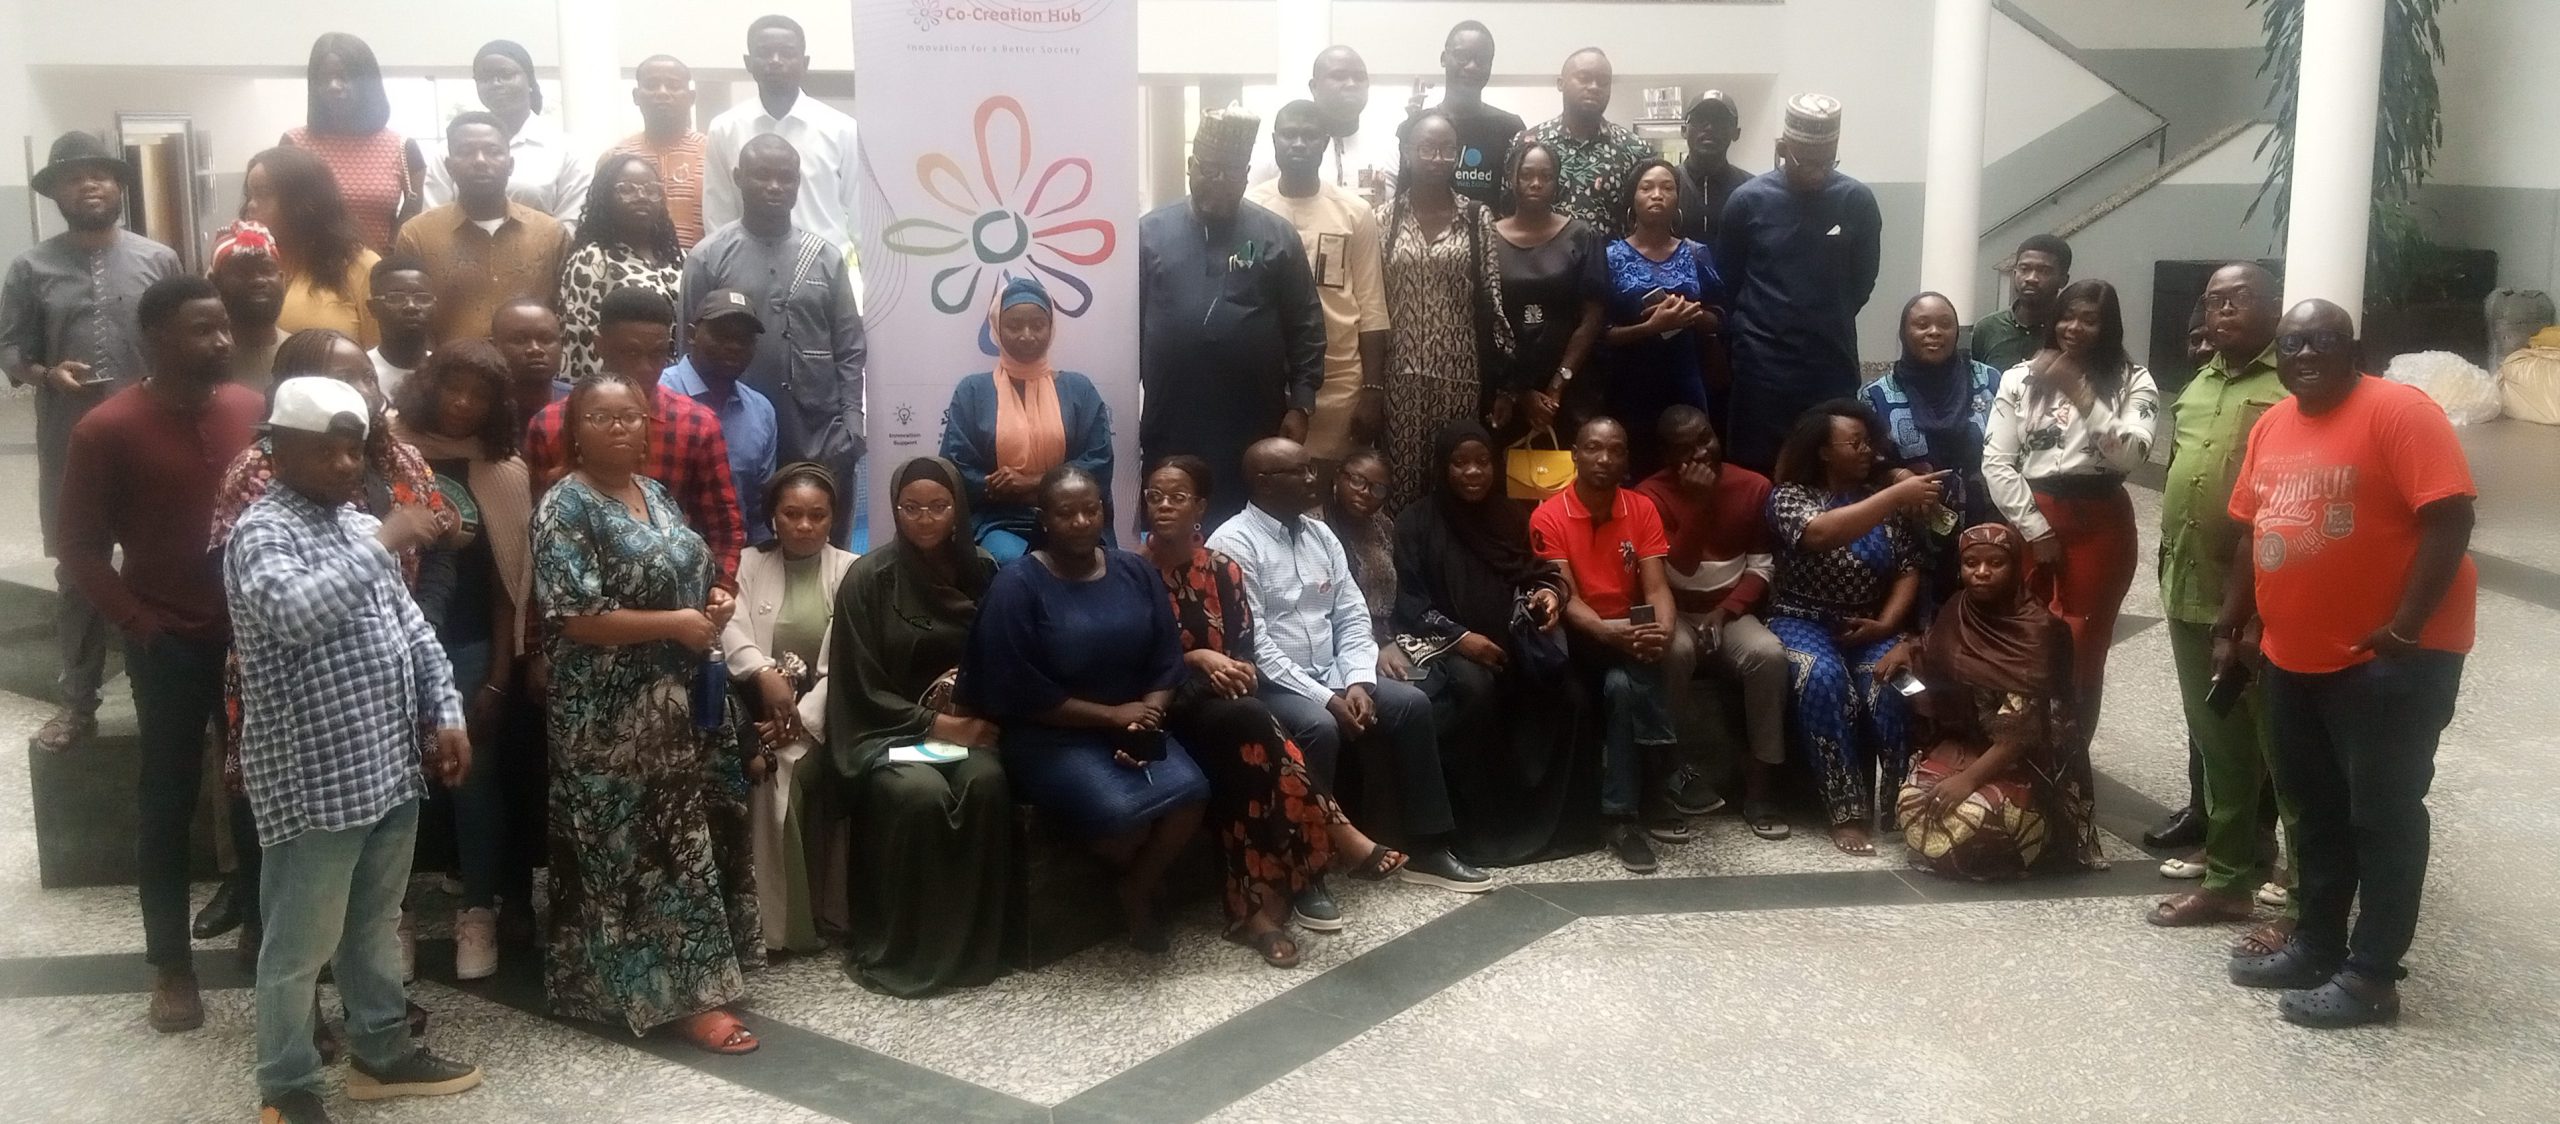 Co-Creative Hub Equips 48 Journalists and Activists in Nigeria with Crucial Digital Security Skills